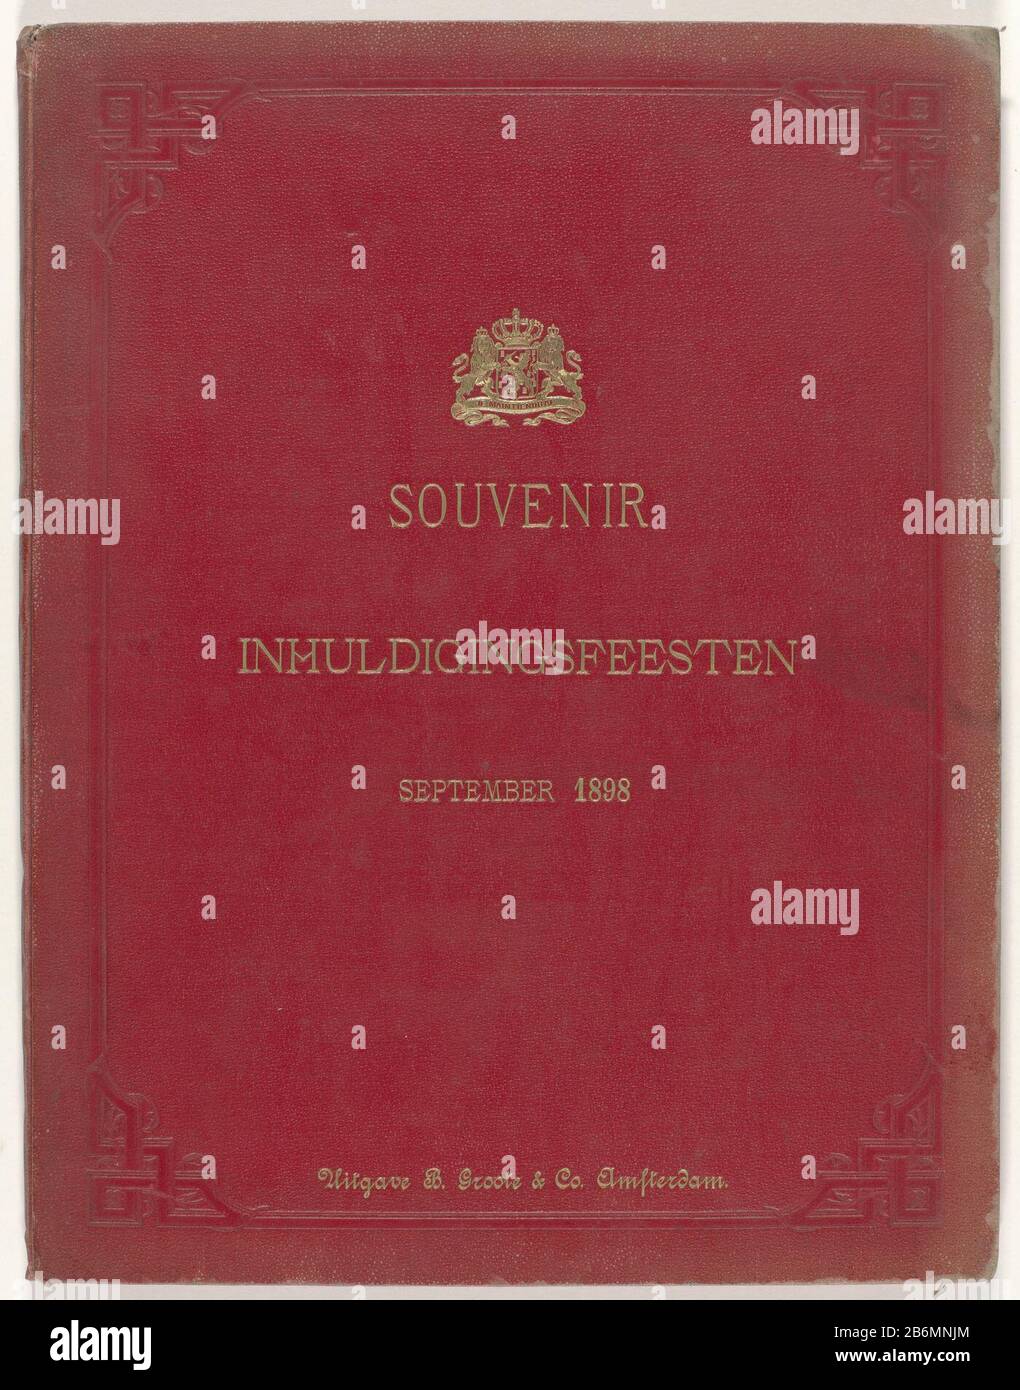 Fotoalbum met tien opnames van de inhuldiging van koningin Wilhelmina en de inhuldigingsfeesten Souvenir inhuldigingsfeesten september 1898 Red Collective with on the front in gold print the title, the name of the publisher and a coat and underneath the slogan 'You maintiendrai. The inside of the front cover and the three dust flaps are covered with embossed paper. The album contains ten photographs, mounted on cardboard. These recordings of the inauguration of Wilhelmina as Queen in September 1898 and festivities were gehouden. Manufacturer  in this context: Photographer: Barend Groote (possi Stock Photo